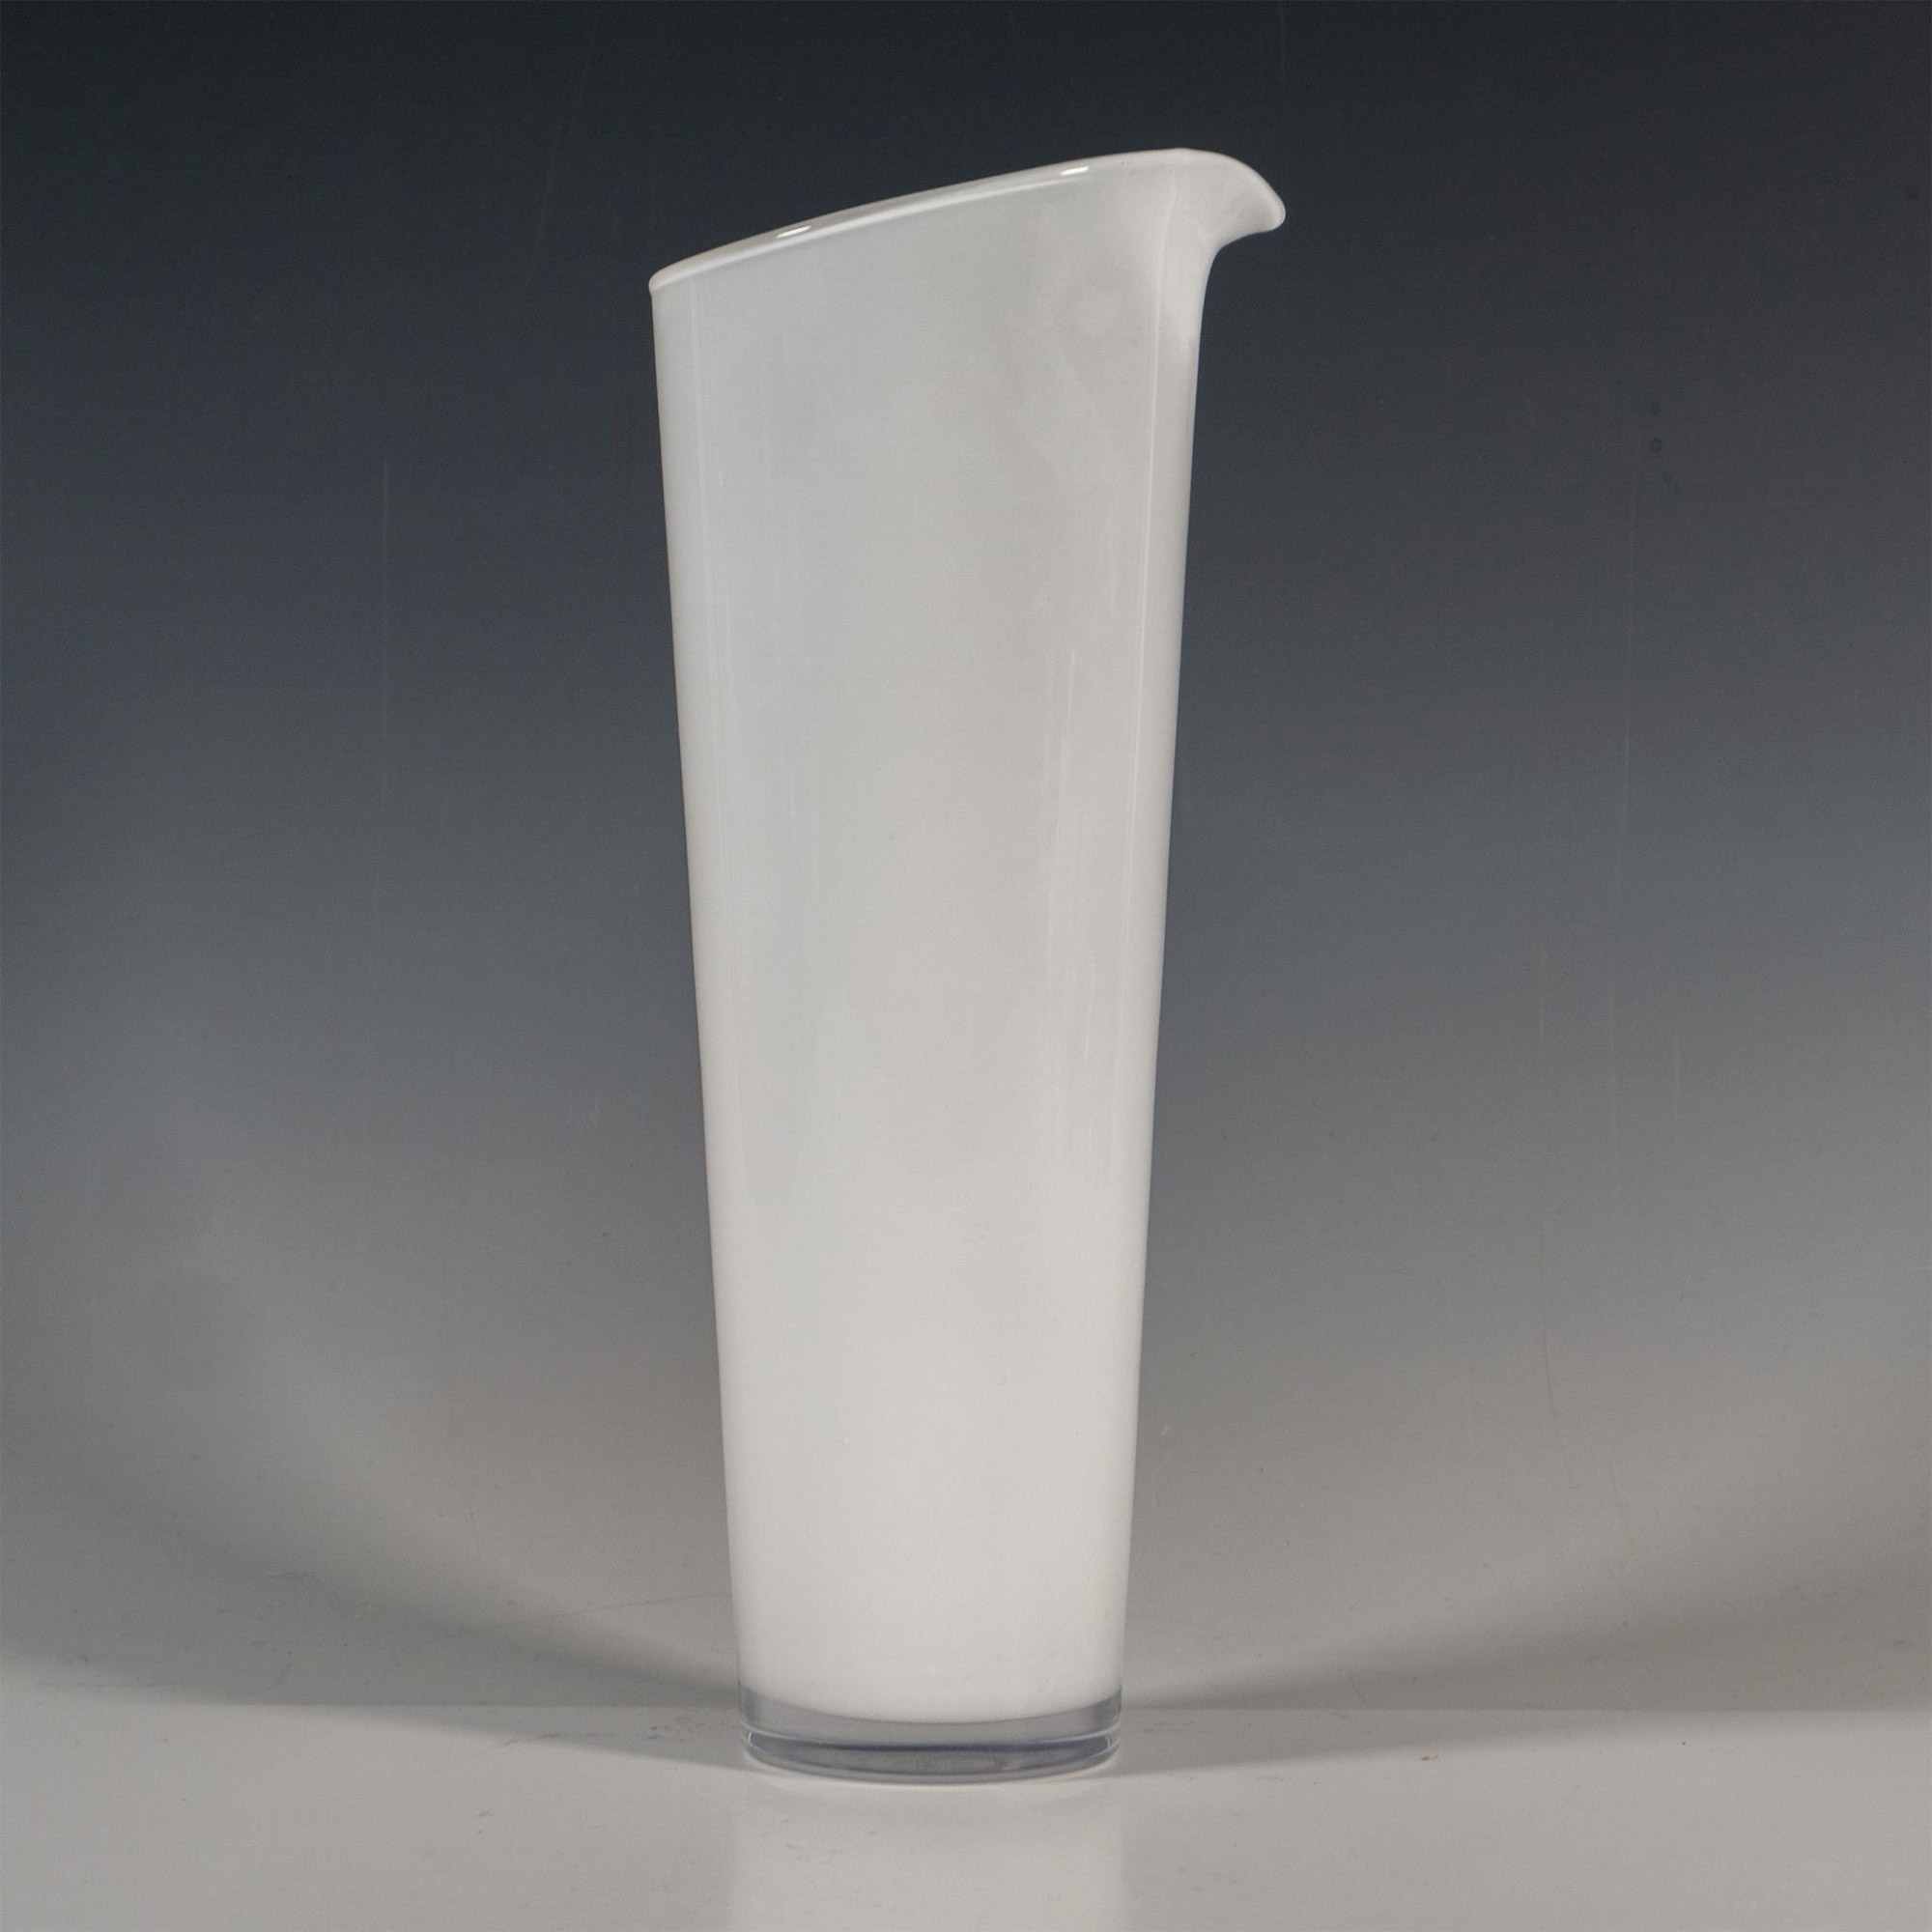 Orrefors White Glass Carafe - Image 3 of 5